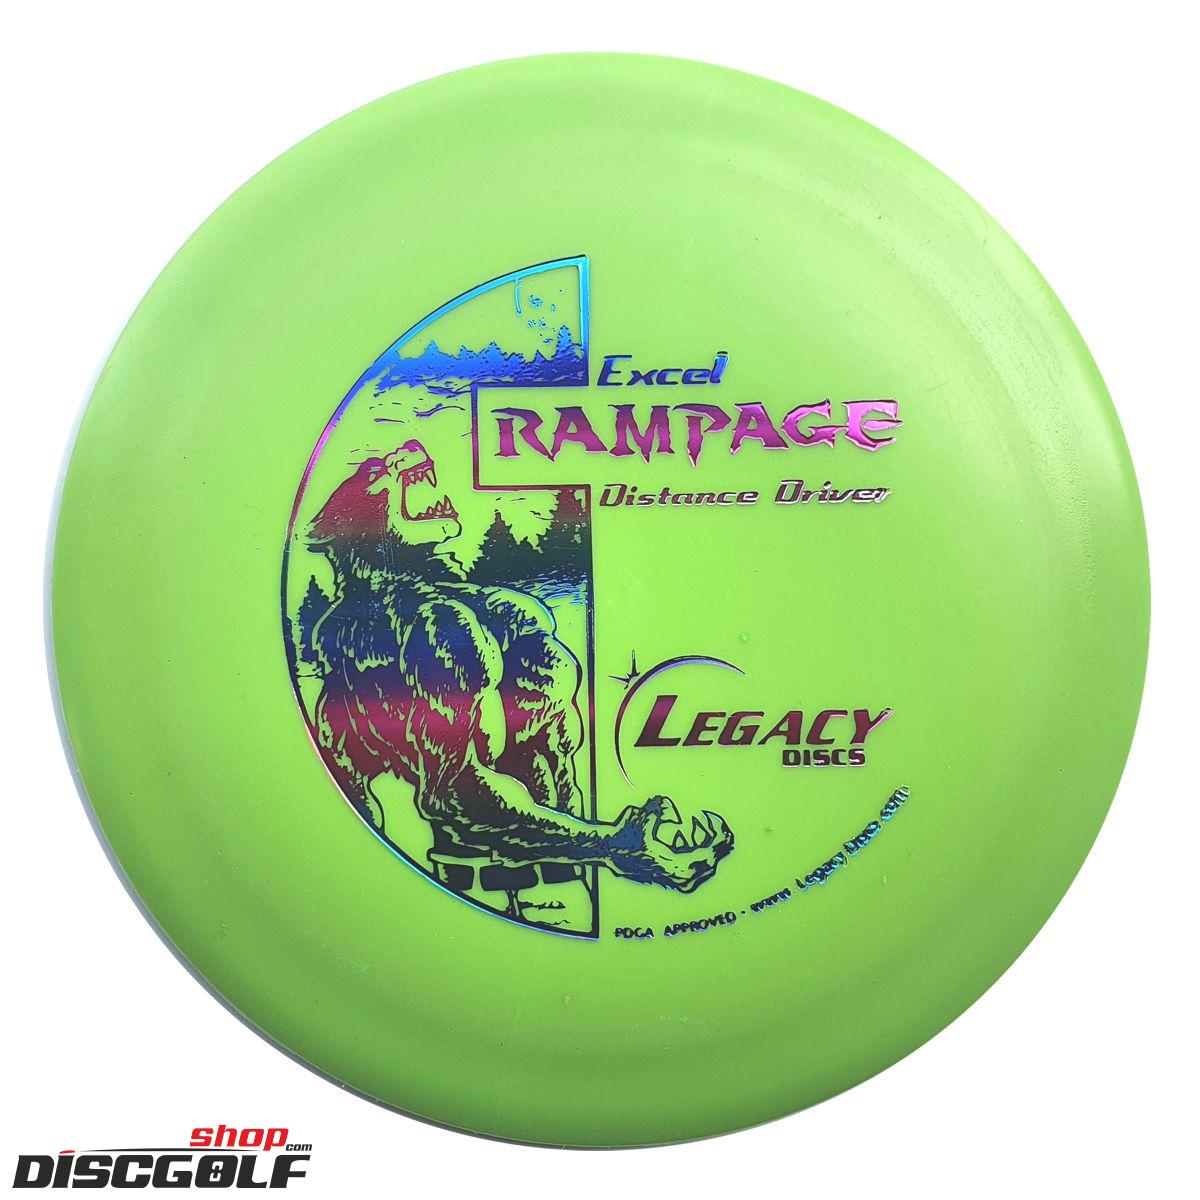 Legacy Discs Rampage Excel